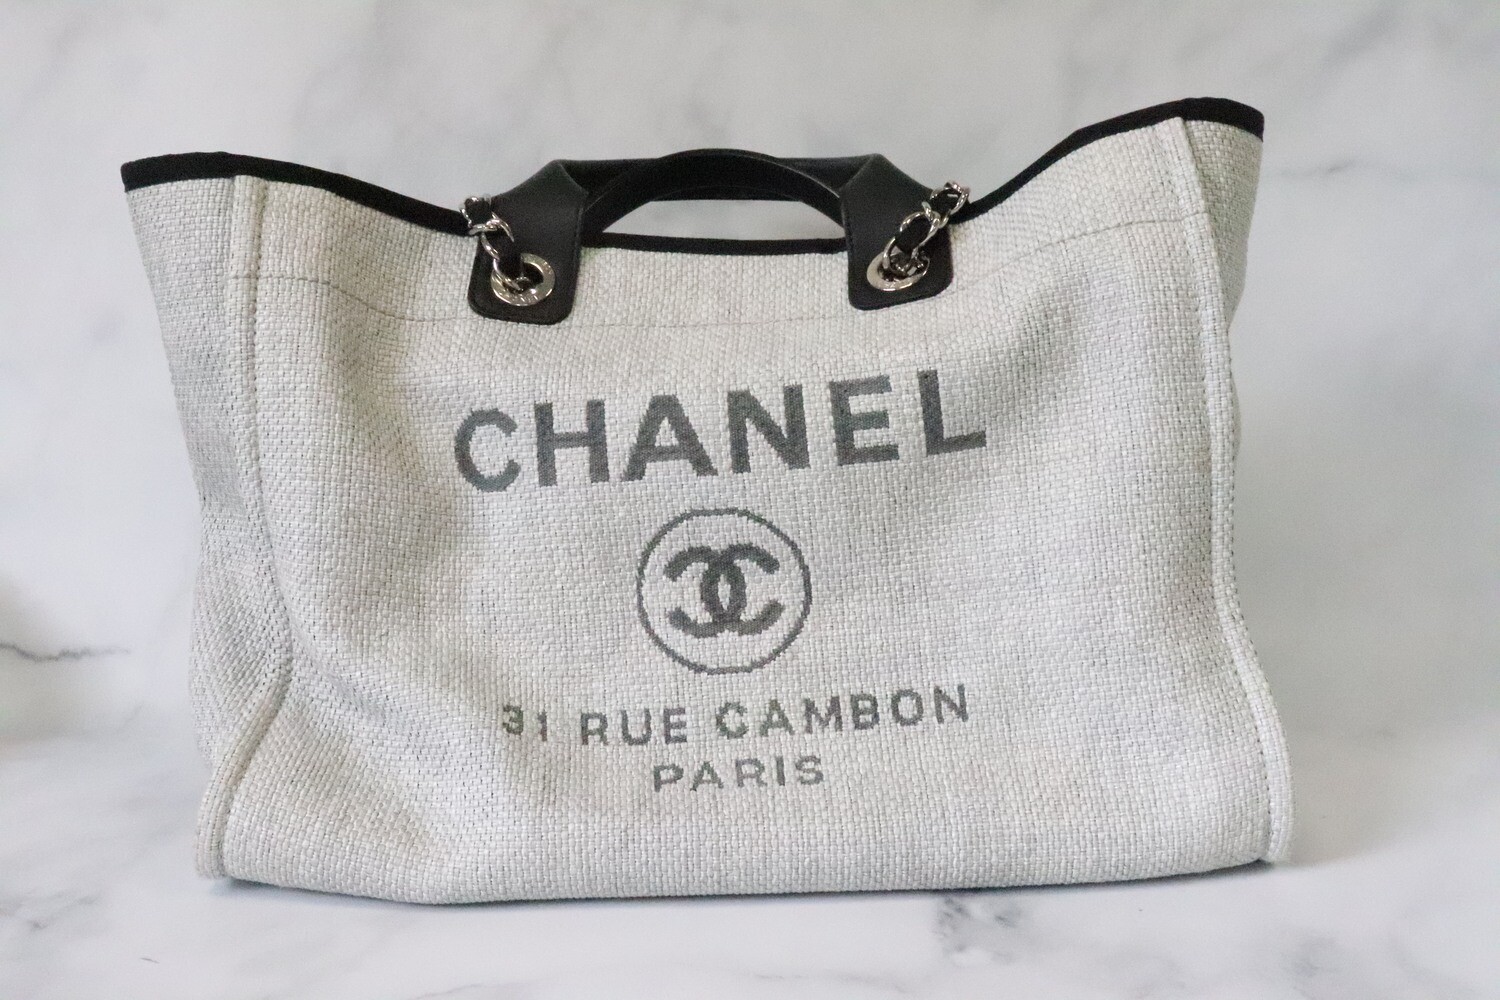 Chanel Deauville Grey Tweed, Silver Hardware, Preowned in Dustbag